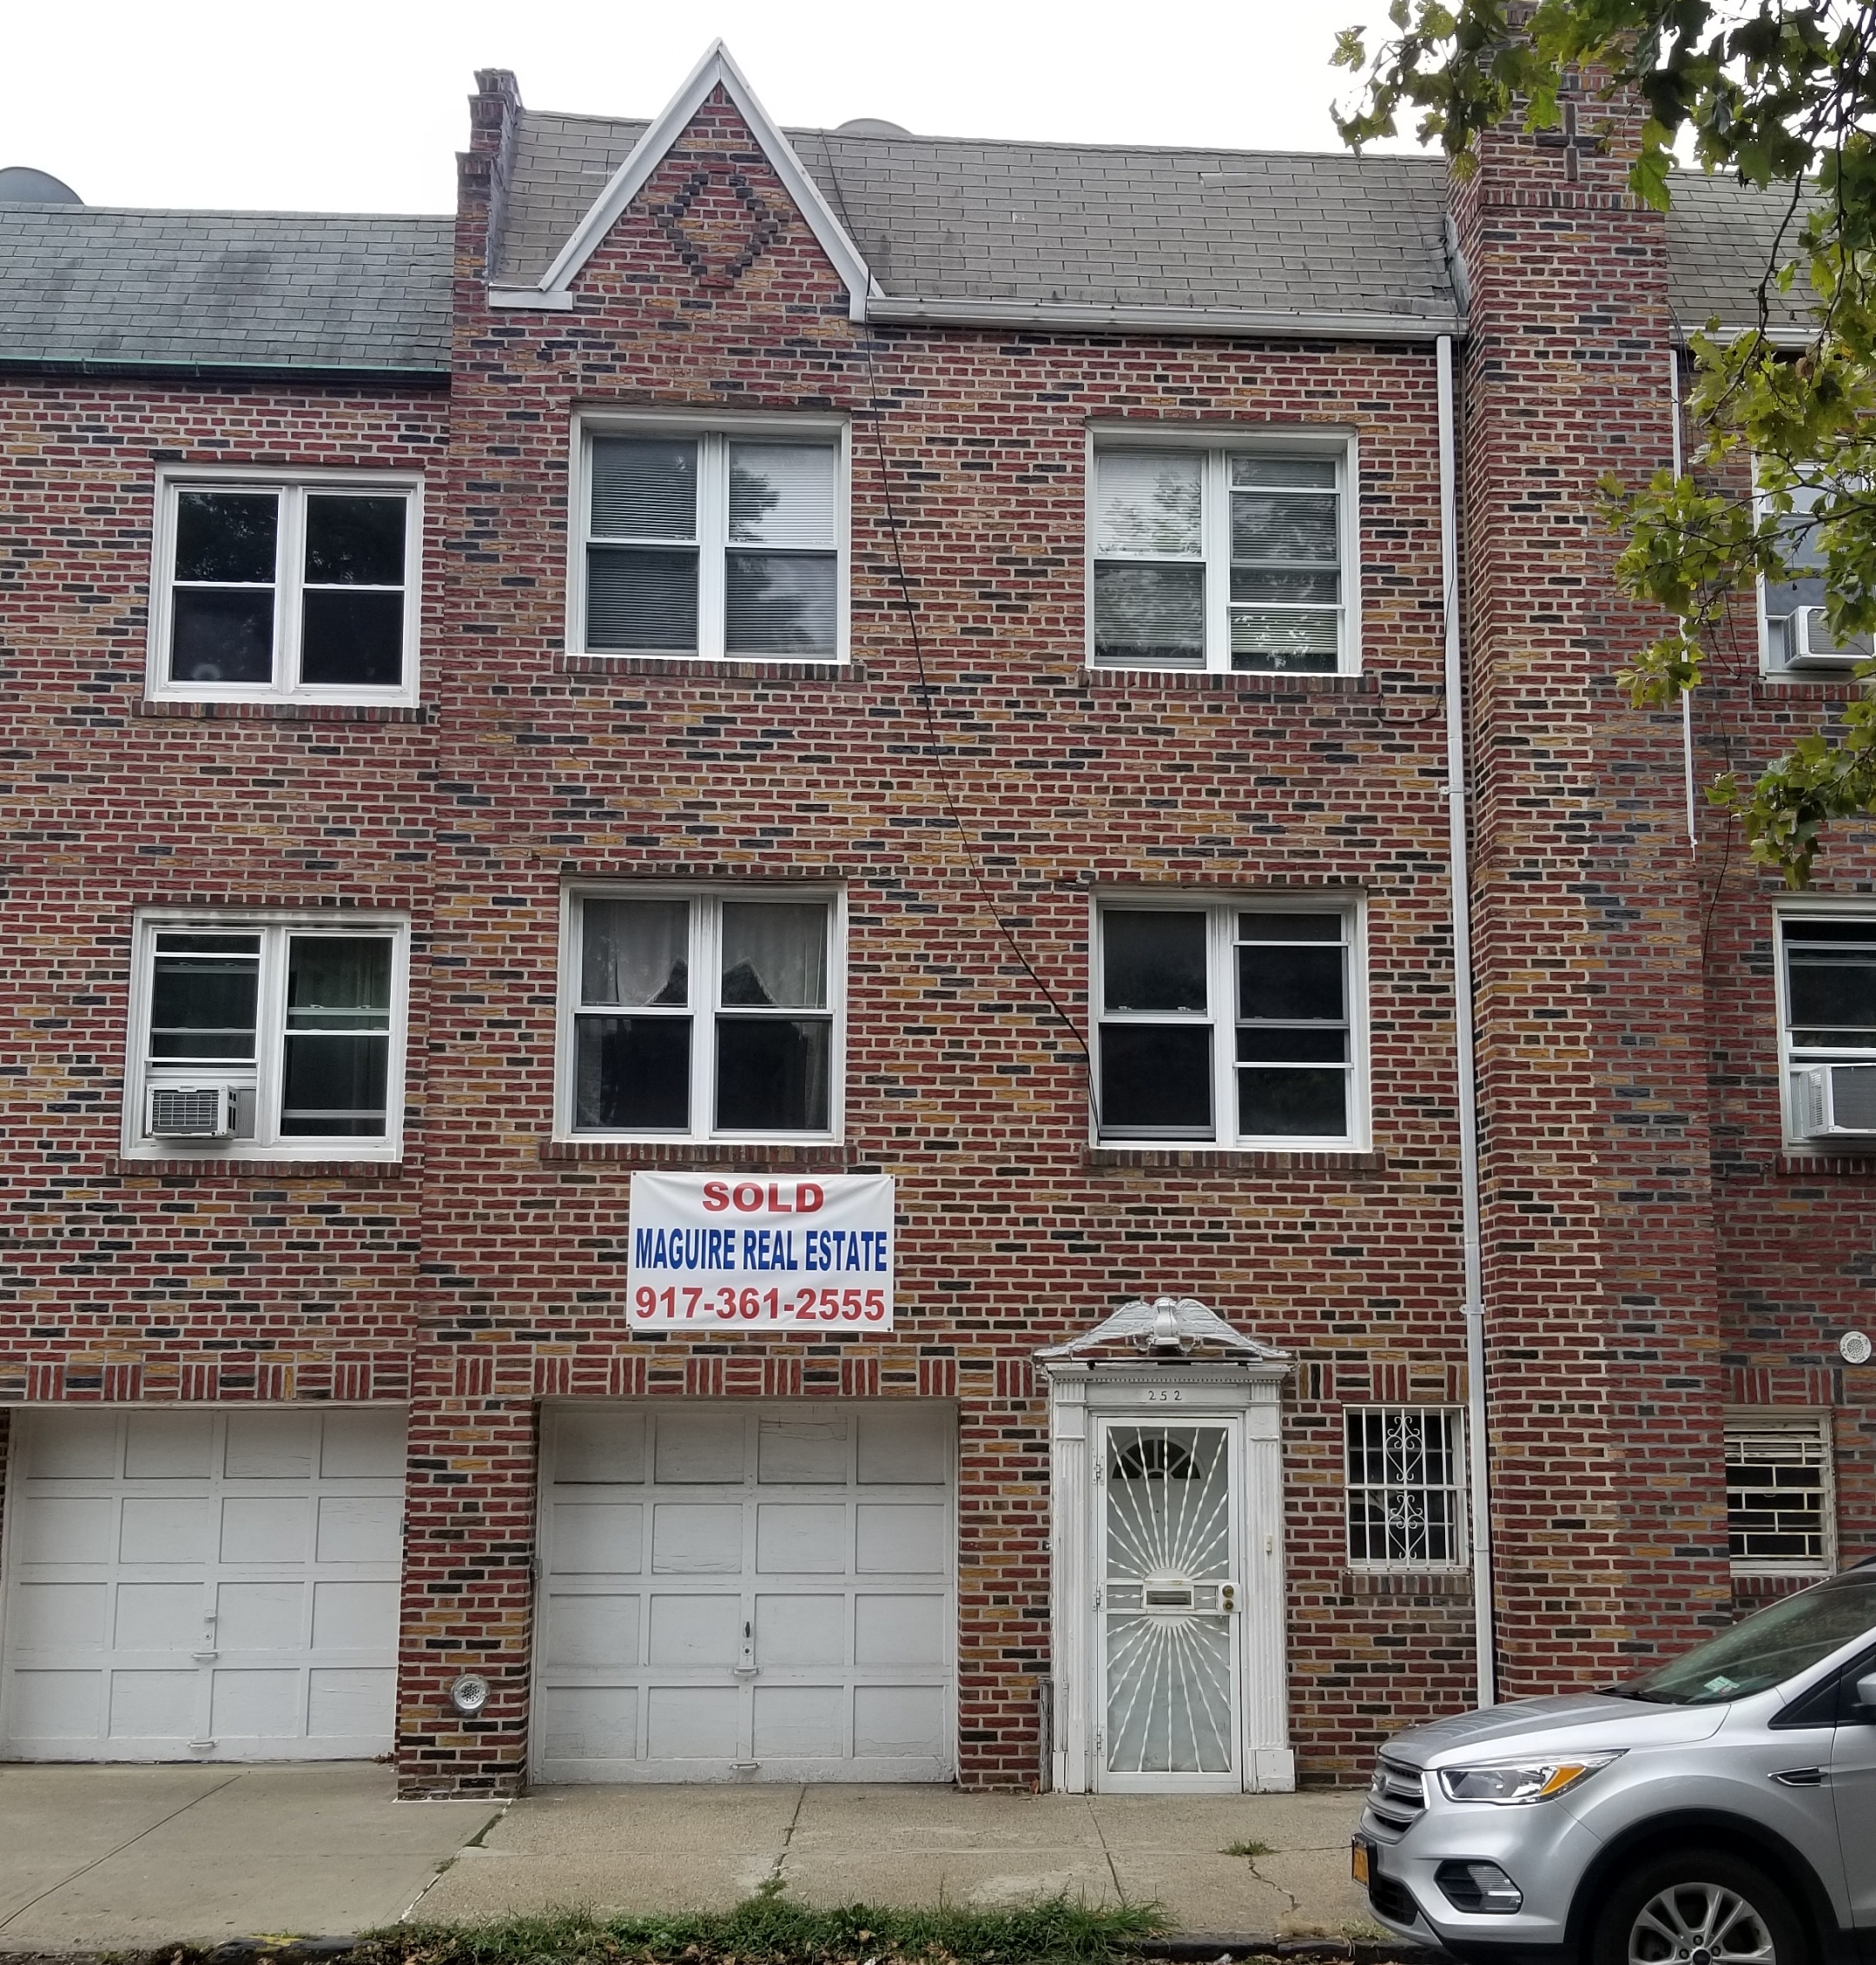 houses for sale maguire real estate brooklyn ny